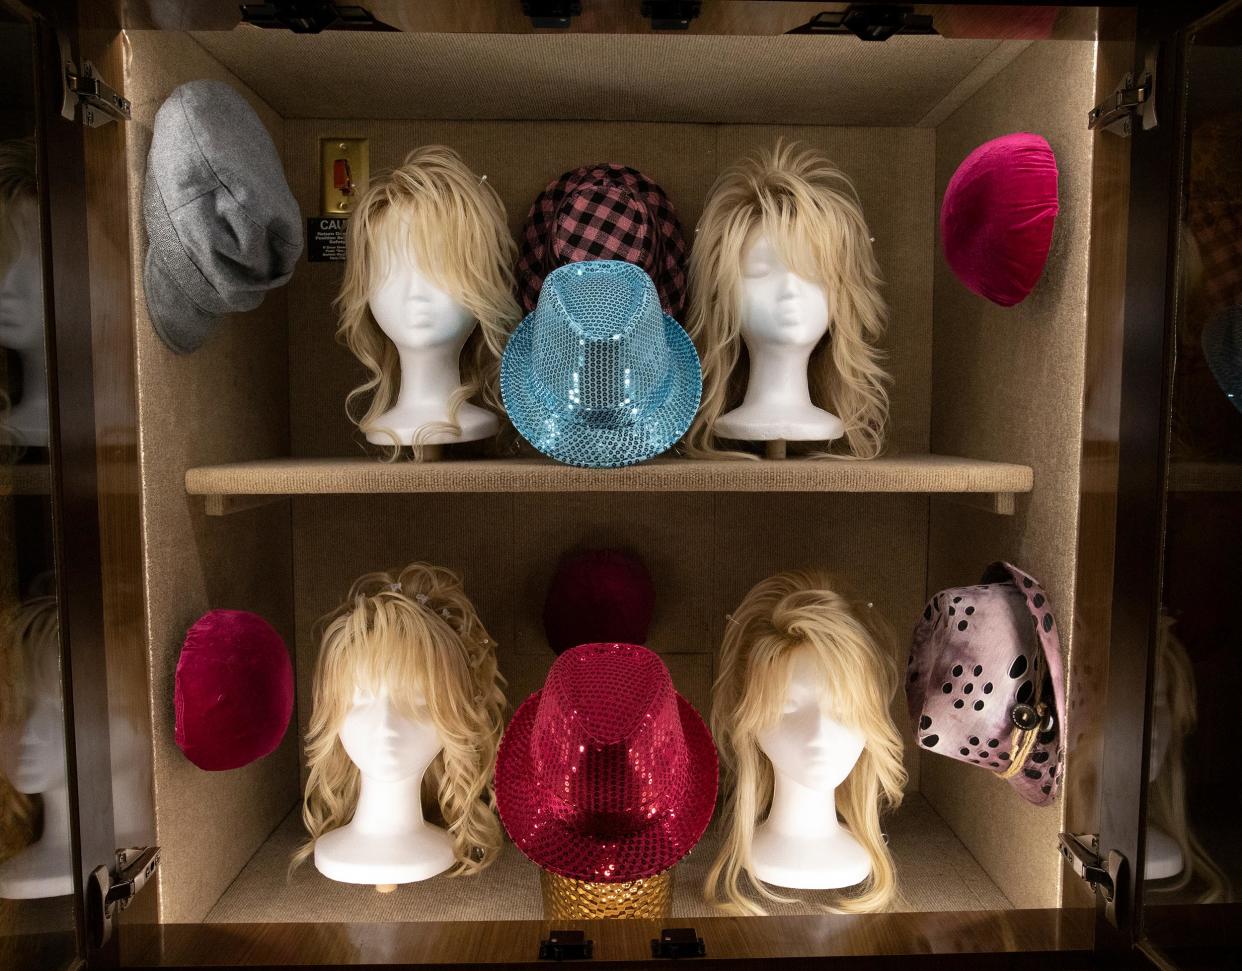 Parton's trademark wigs are on display for guests. (Curtis Hilbun / The Dollywood Company)